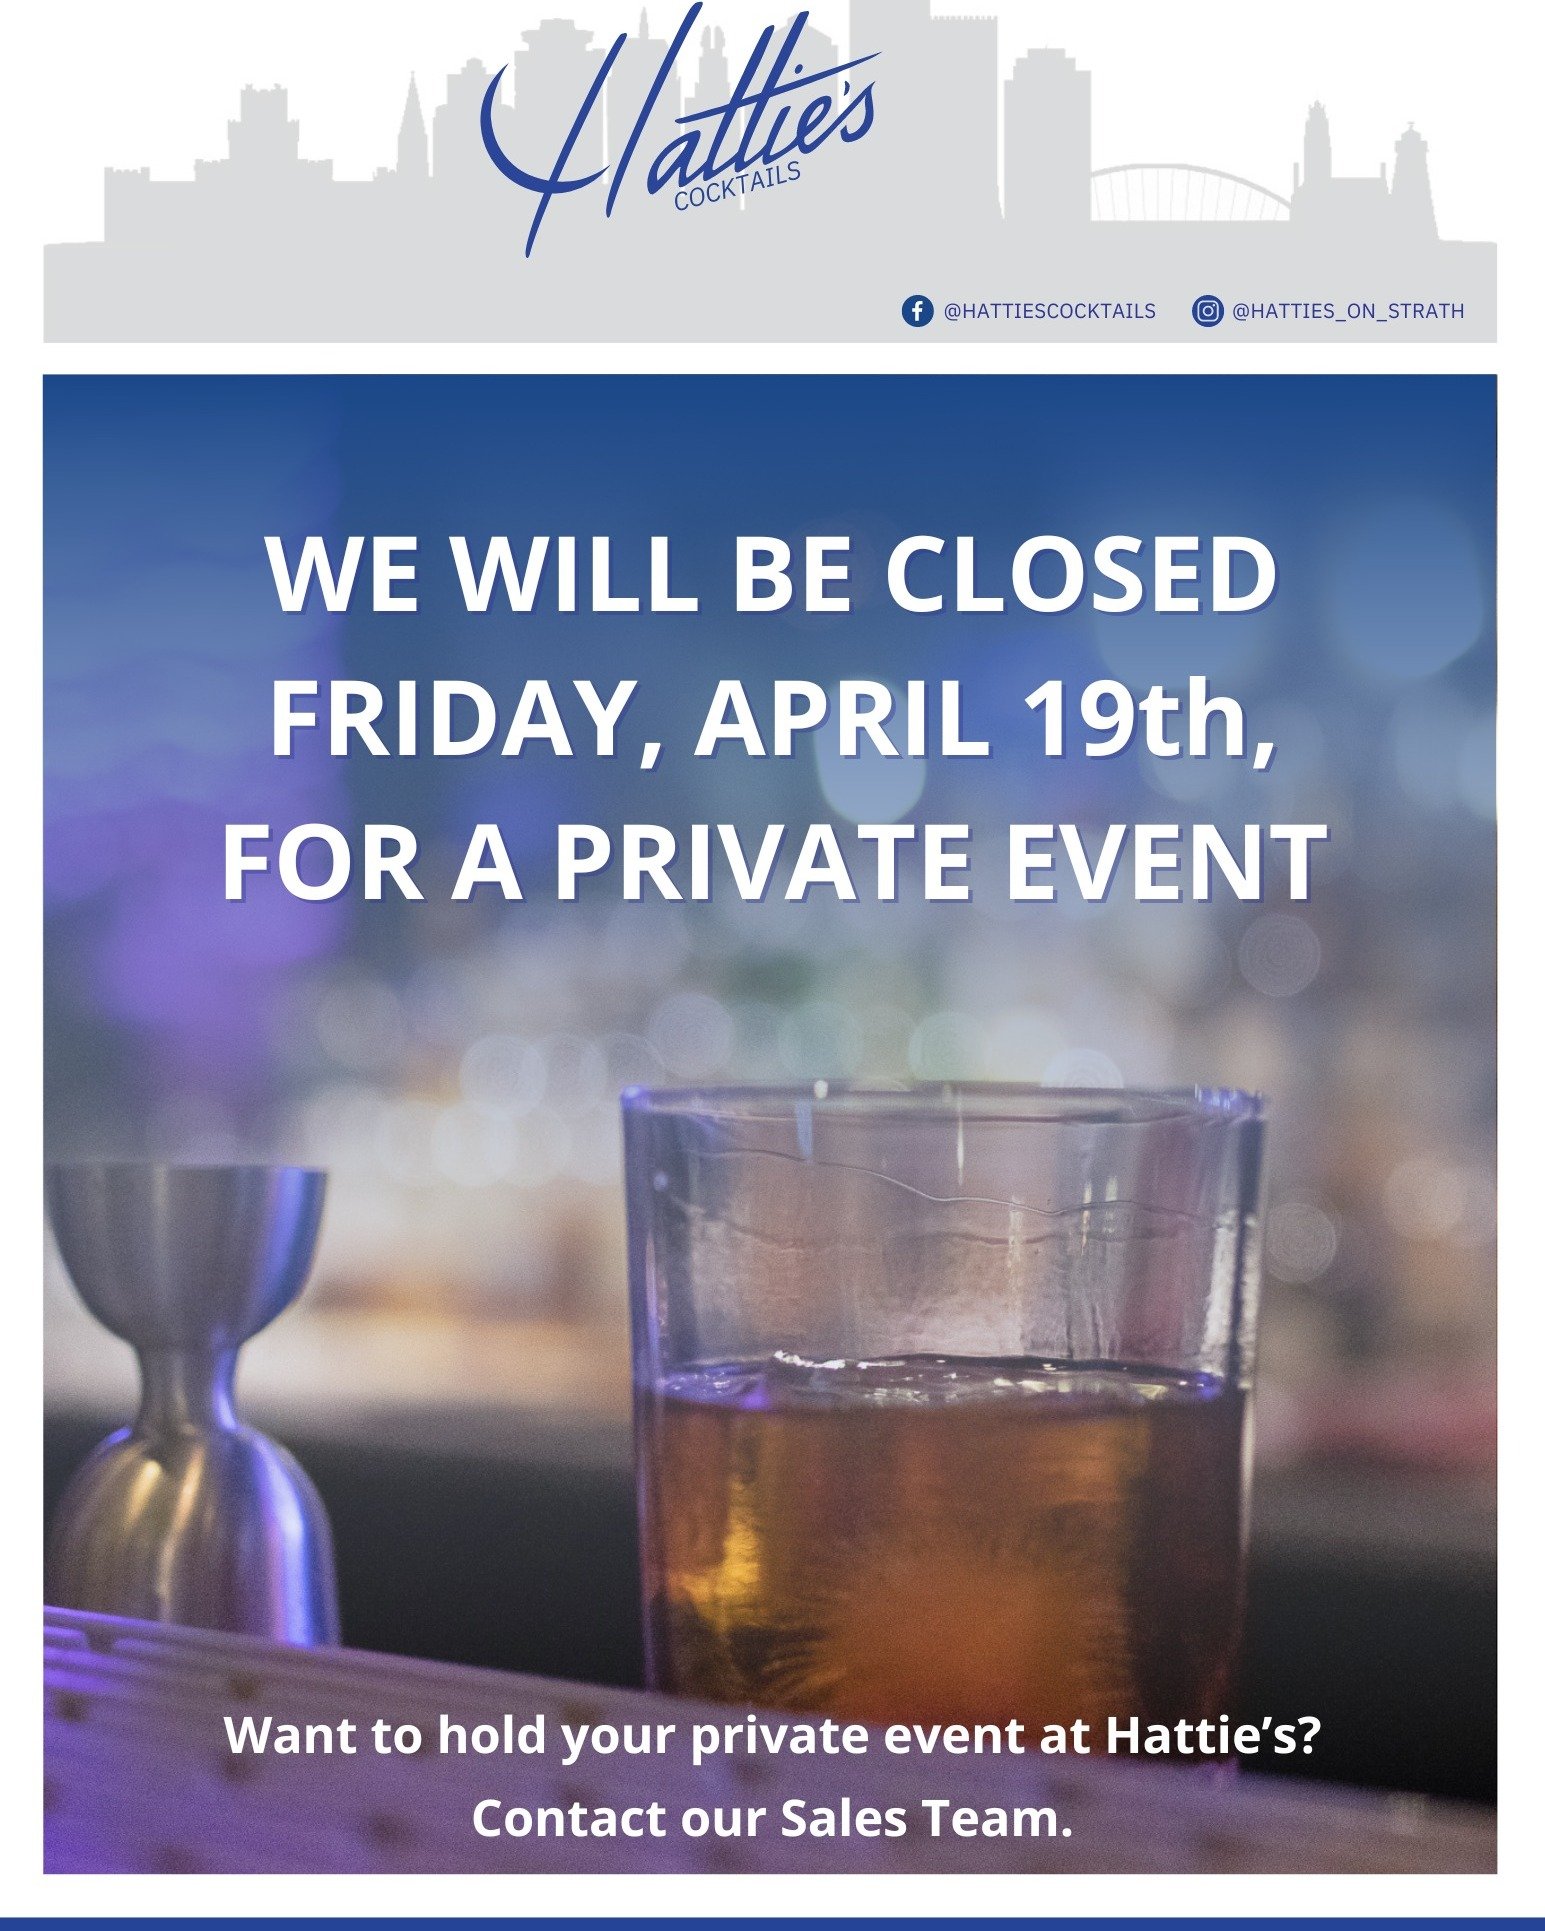 Hattie's will be closed tomorrow, Friday, April 19th, for a private event, so join us tonight  instead! Char will be open for drinks on Friday if you'd like to enjoy a beverage and some awesome food downstairs.

If you'd like to host a private party 